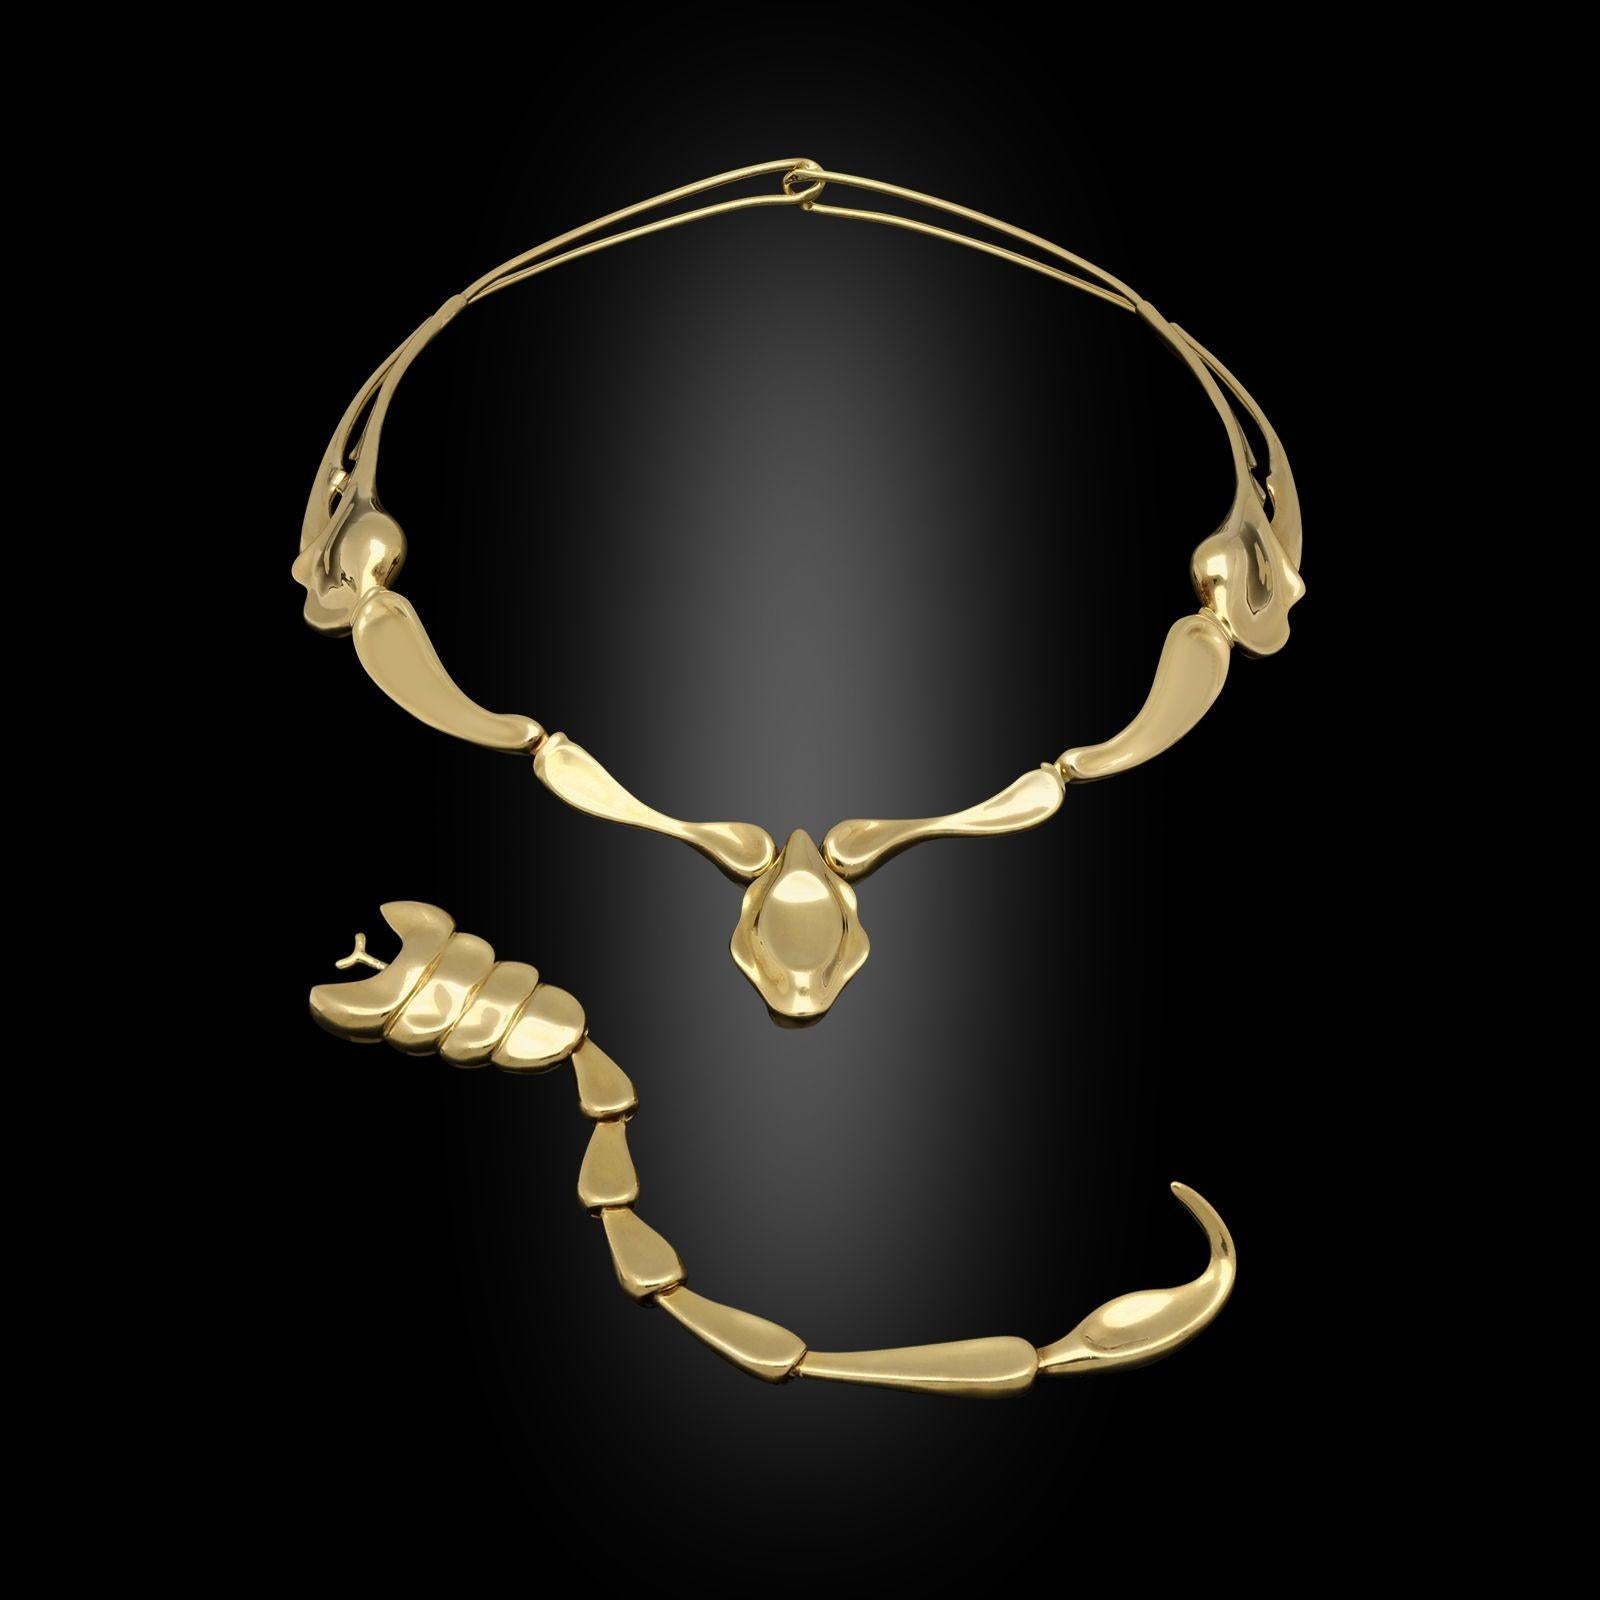 An iconic 18ct yellow gold scorpion necklace by Tiffany & Co, designed by Elsa Peretti in 1979, the torque style necklace is formed by the elongated front legs and pincers of the scorpion made in articulated segments for comfort and fit, the